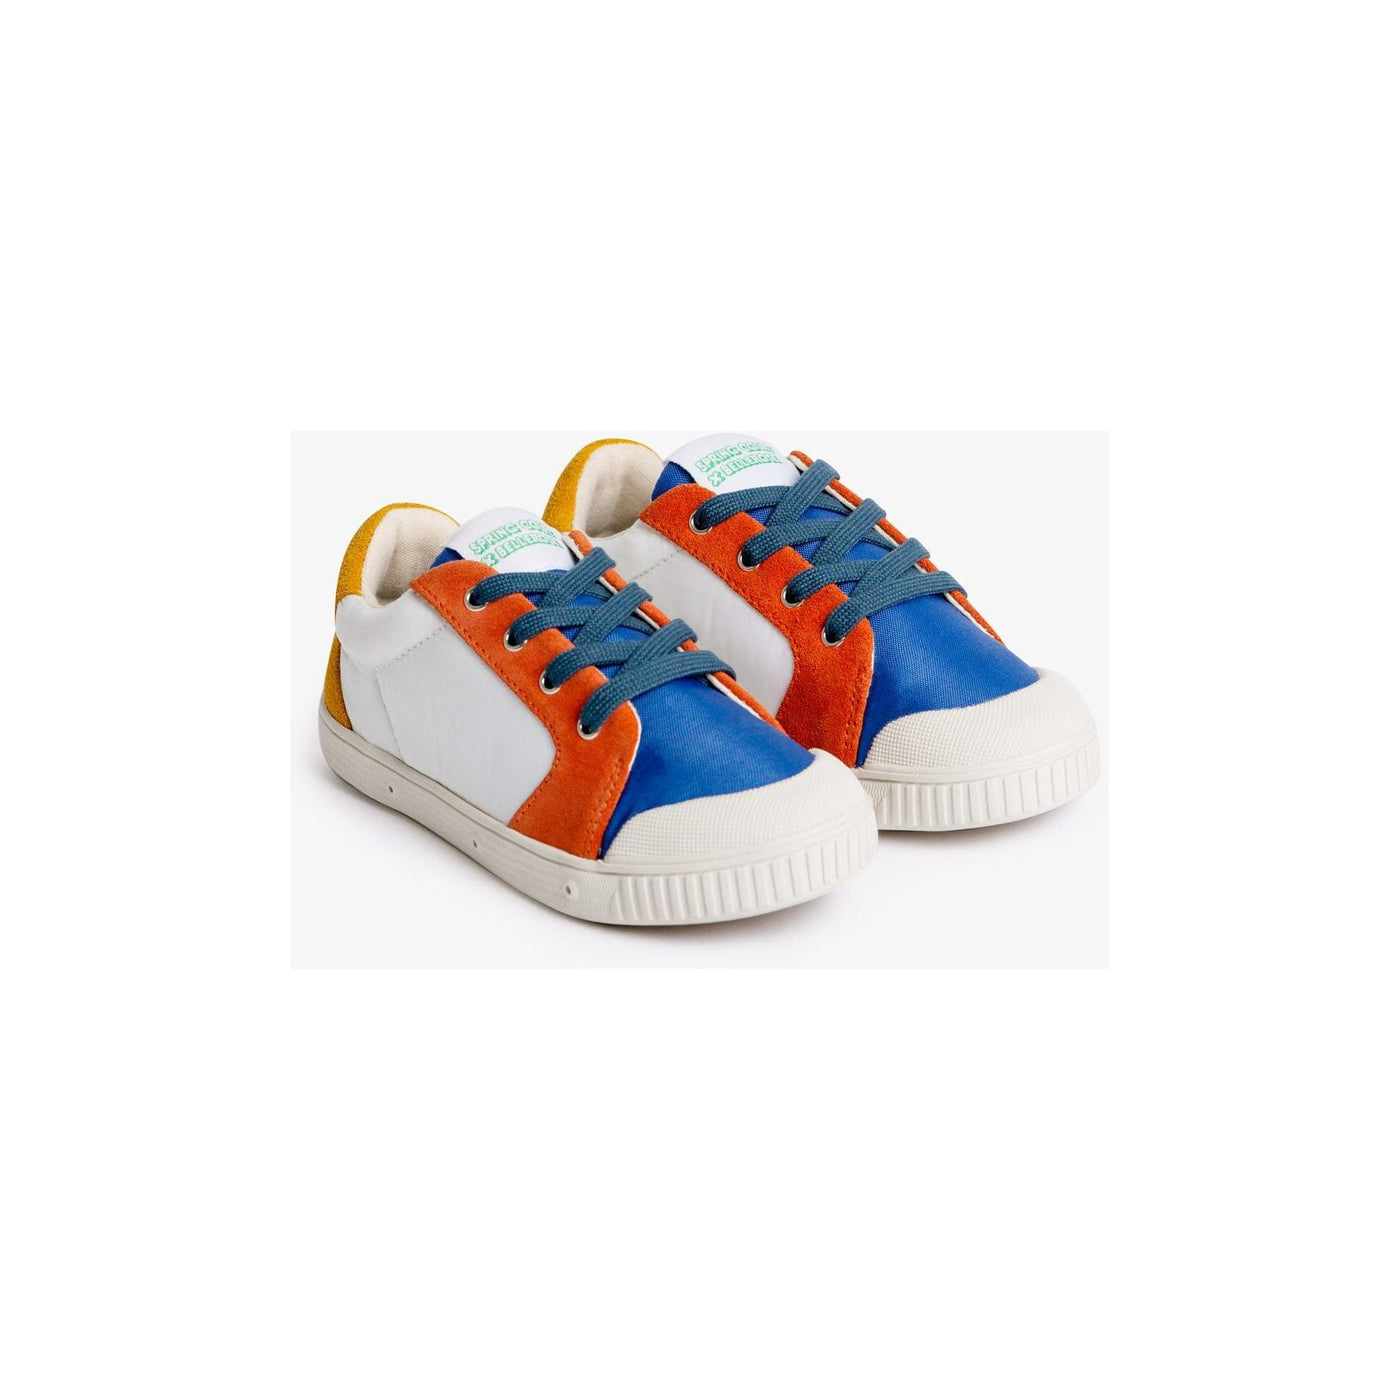 SPRINGCOURT - Low Top Sneakers White/Yellow - Le CirQue Kidsconceptstore 